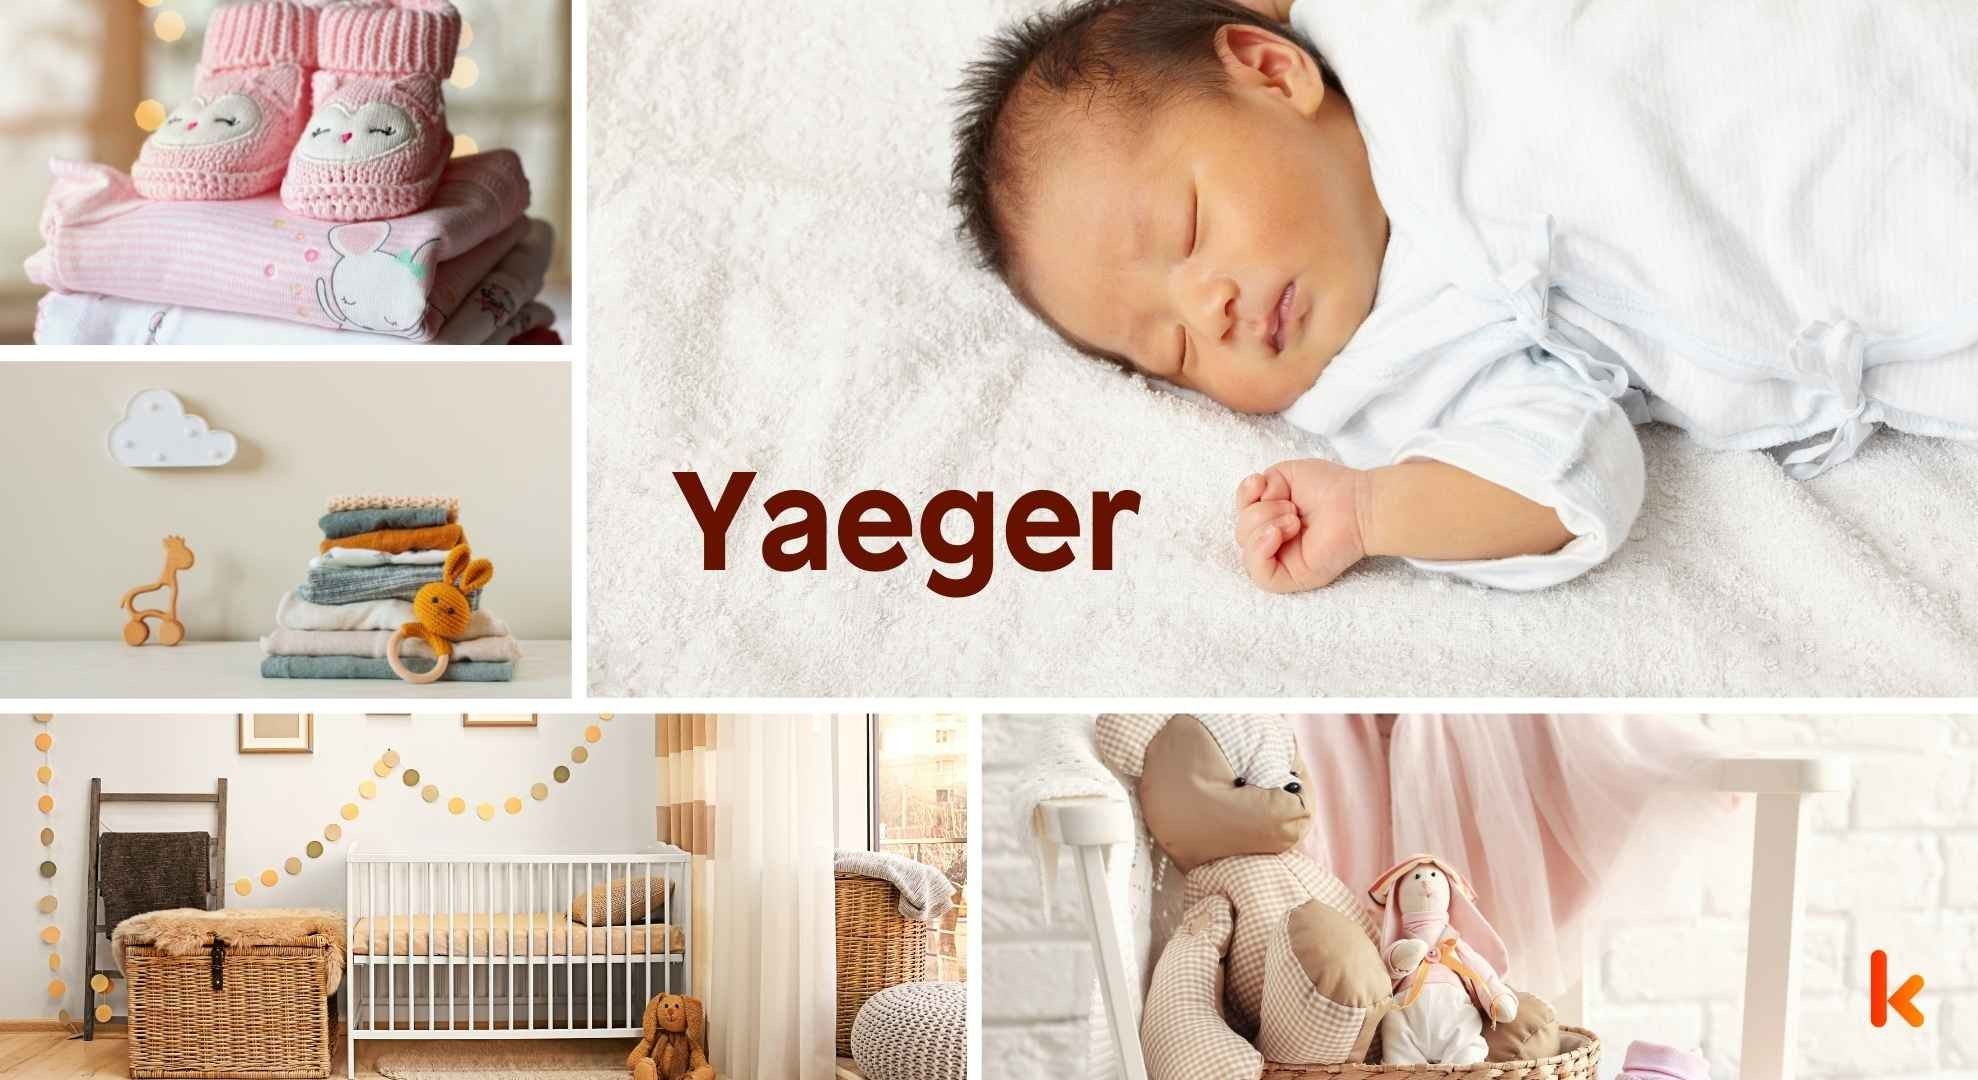 Meaning of the name Yaeger